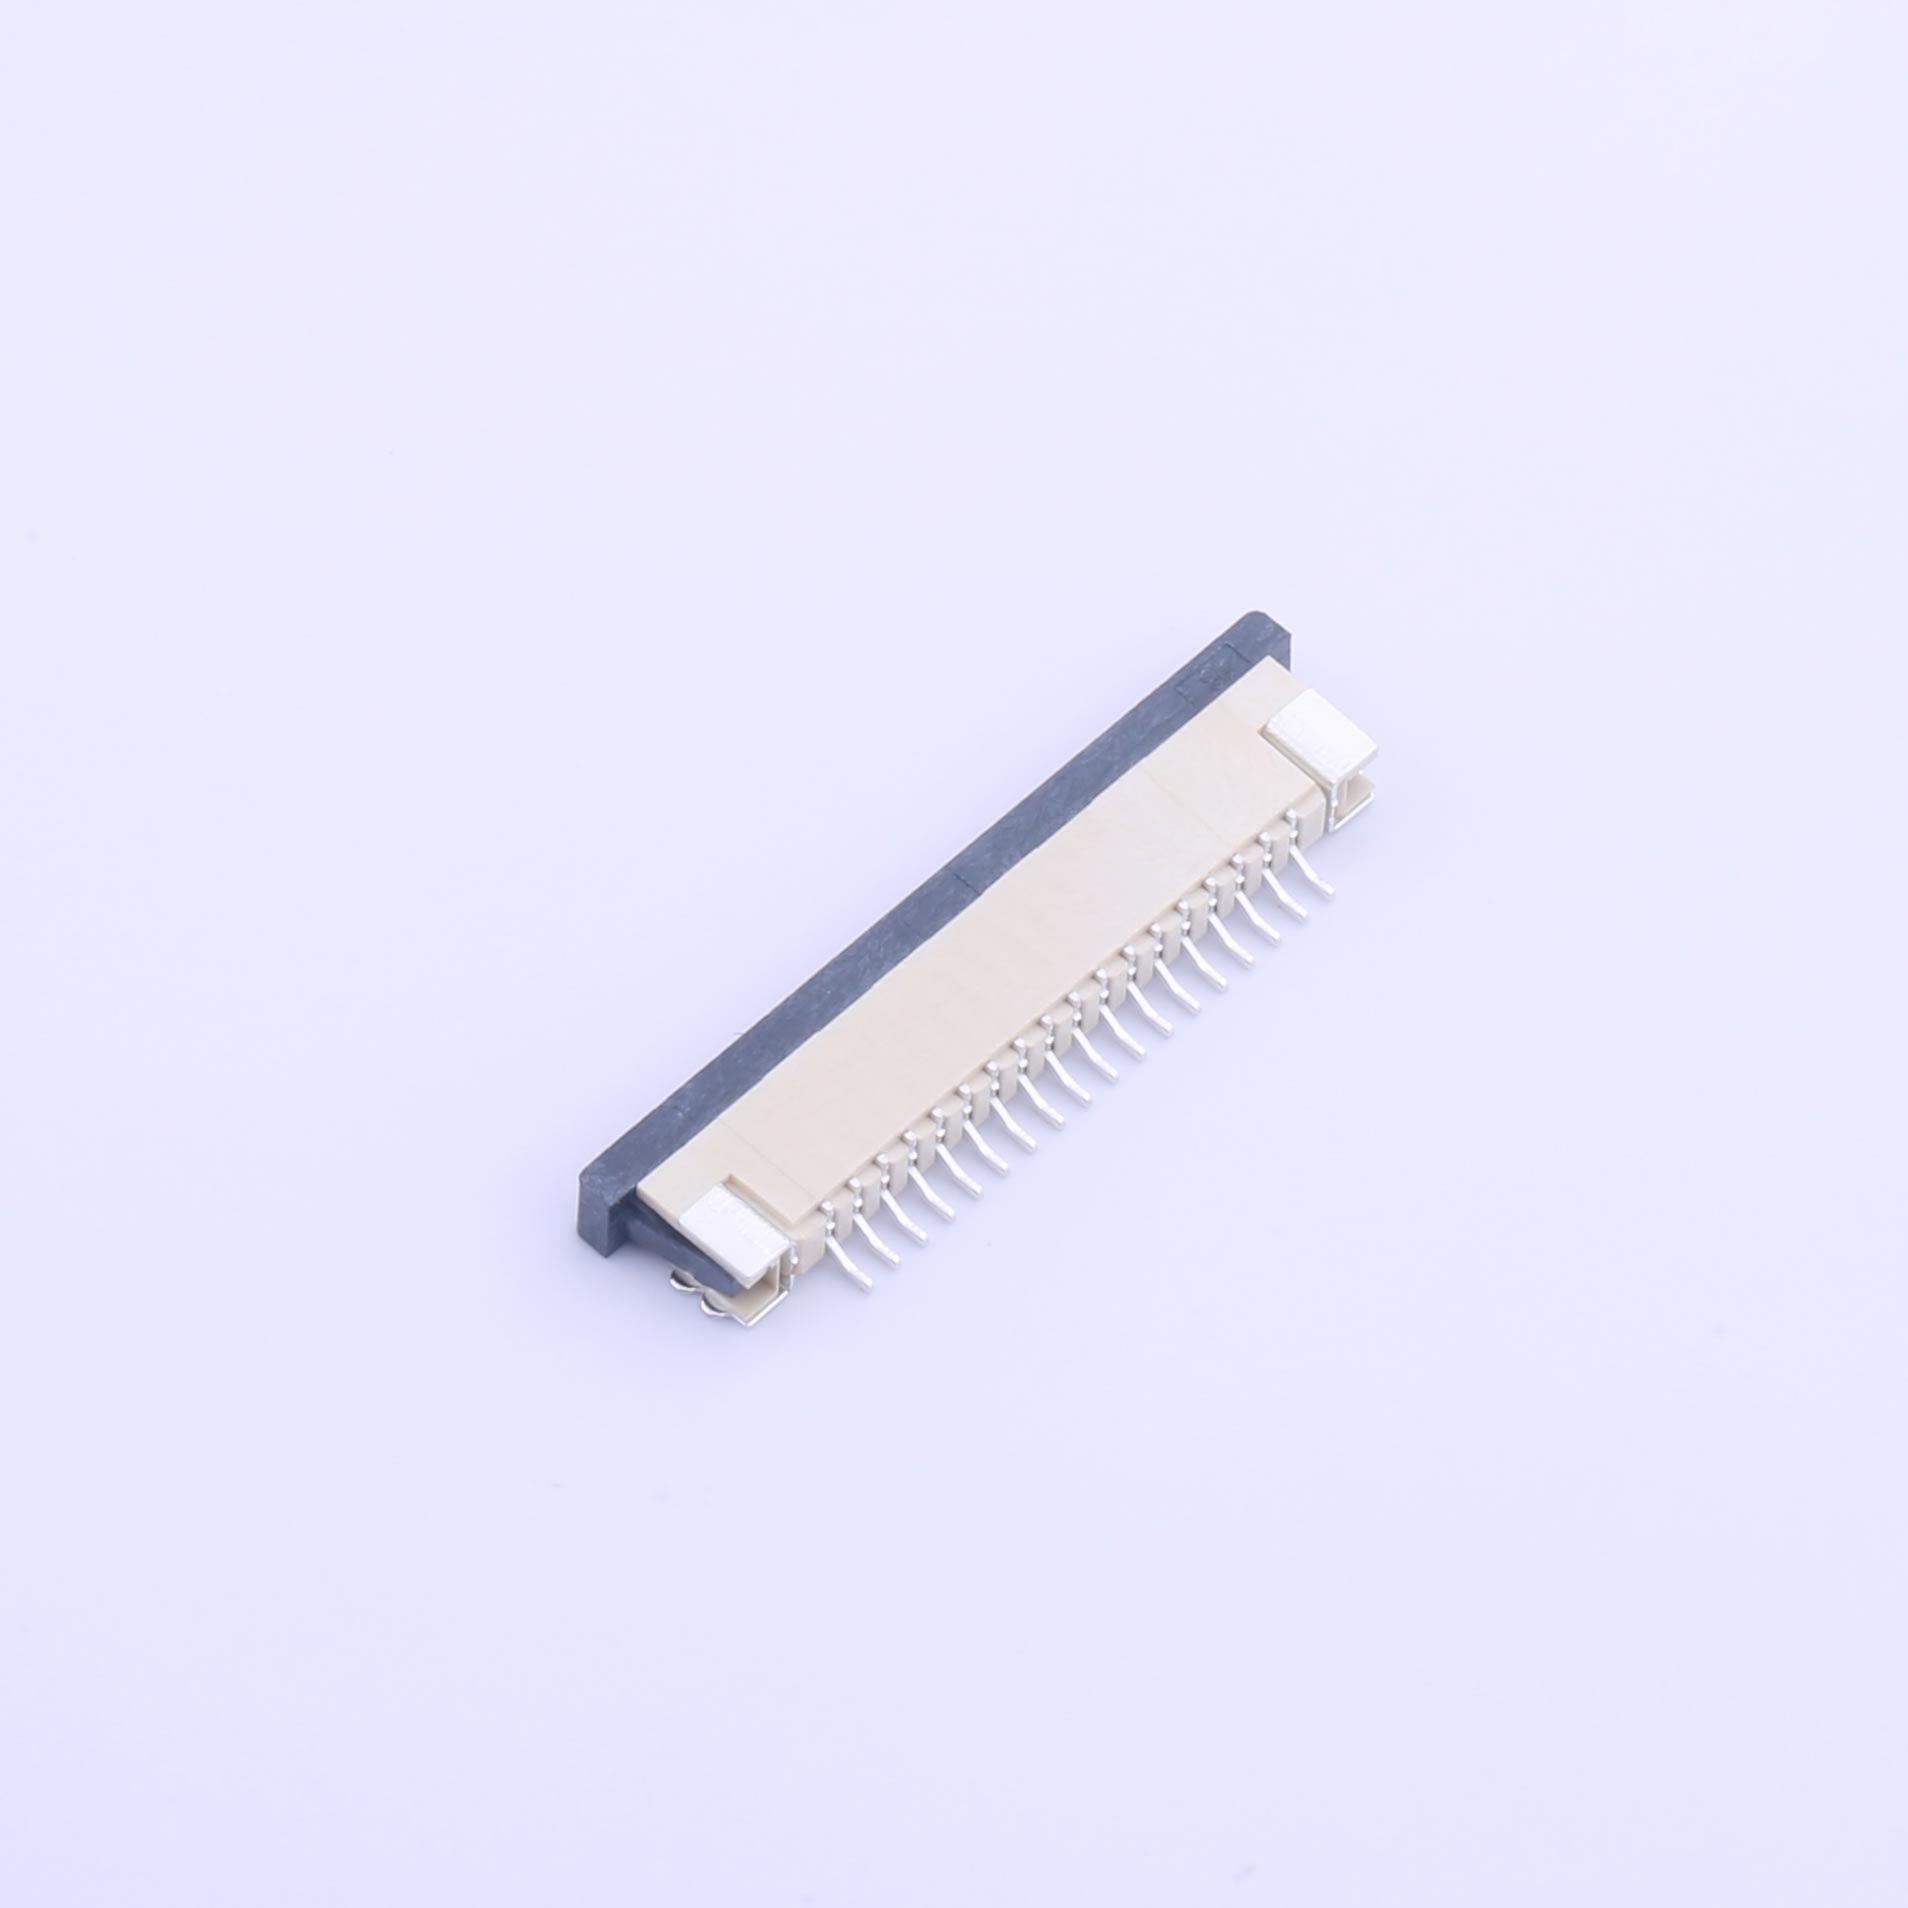 Kinghelm FFC/FPC Connector 18p Pitch 1mm - KH-CL1.0-H2.5-18pin